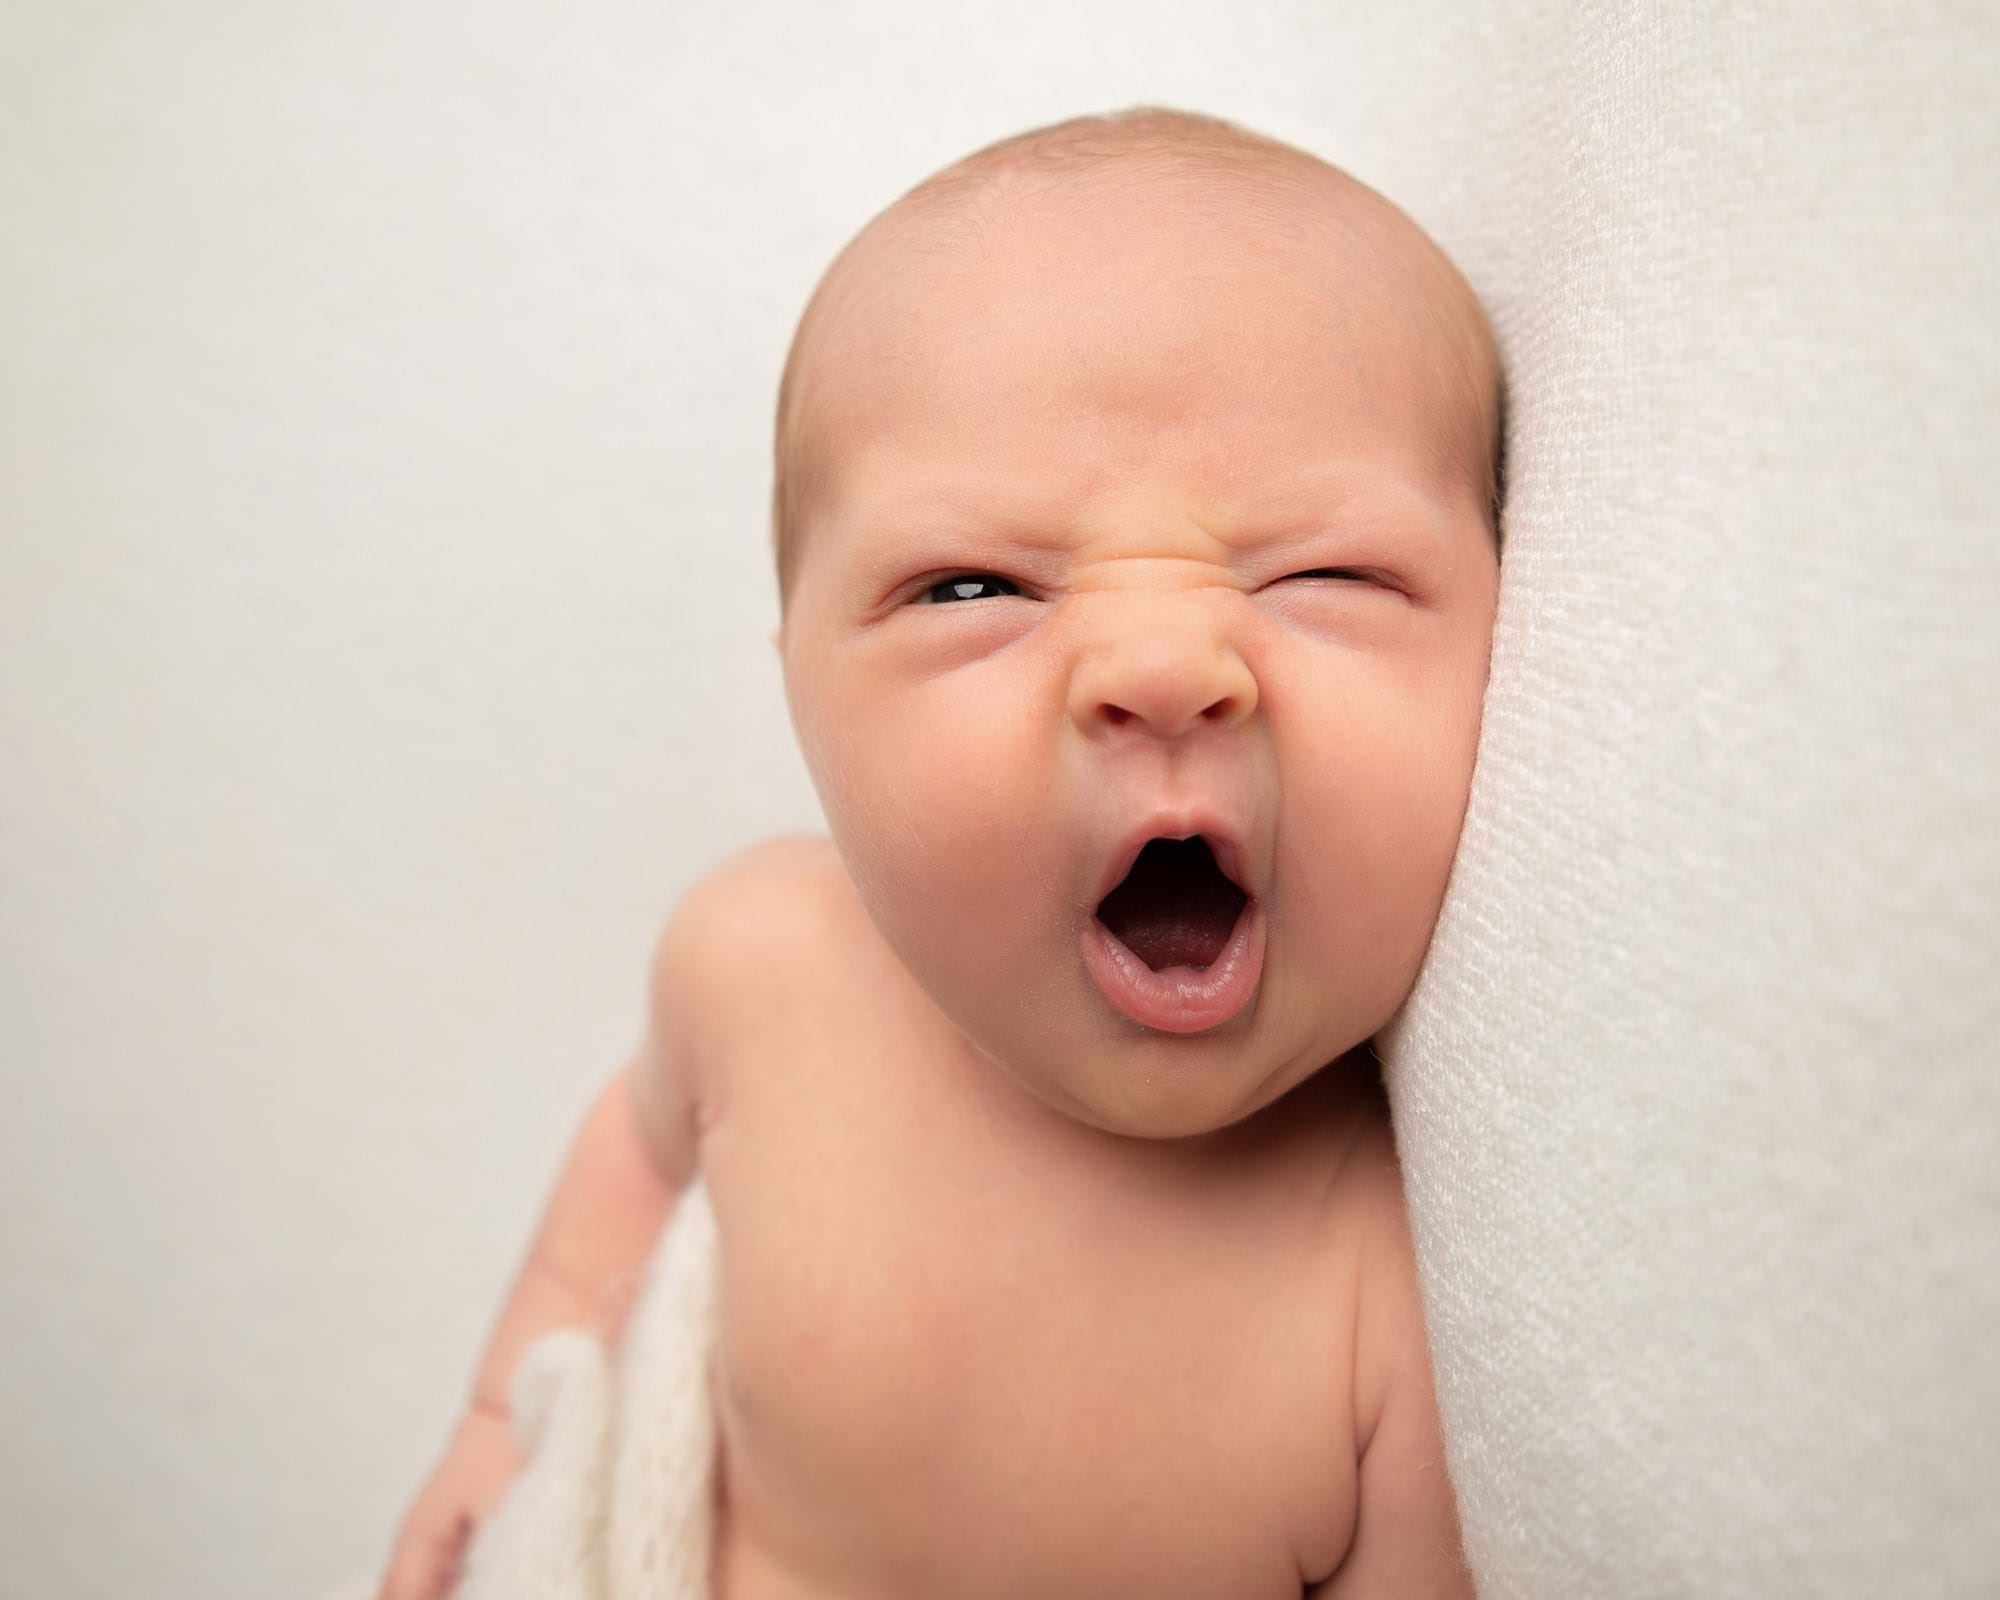 Image during Glasgow Baby Photoshoot of a baby on a cream blanket. Close up shot of baby yawning